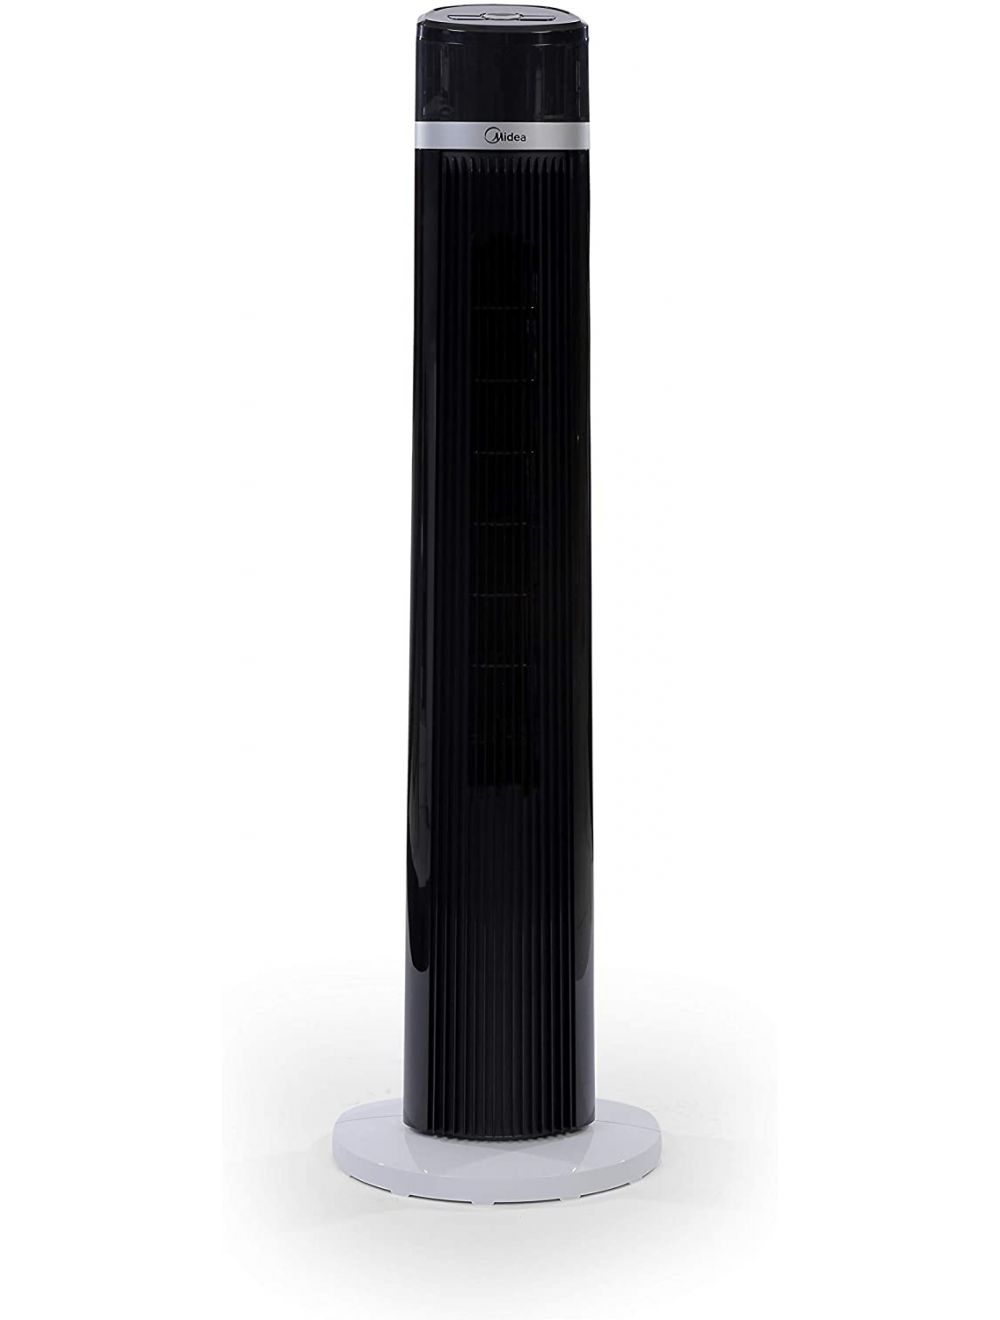 Midea Tower Fan with Remote-FZ10-18TR